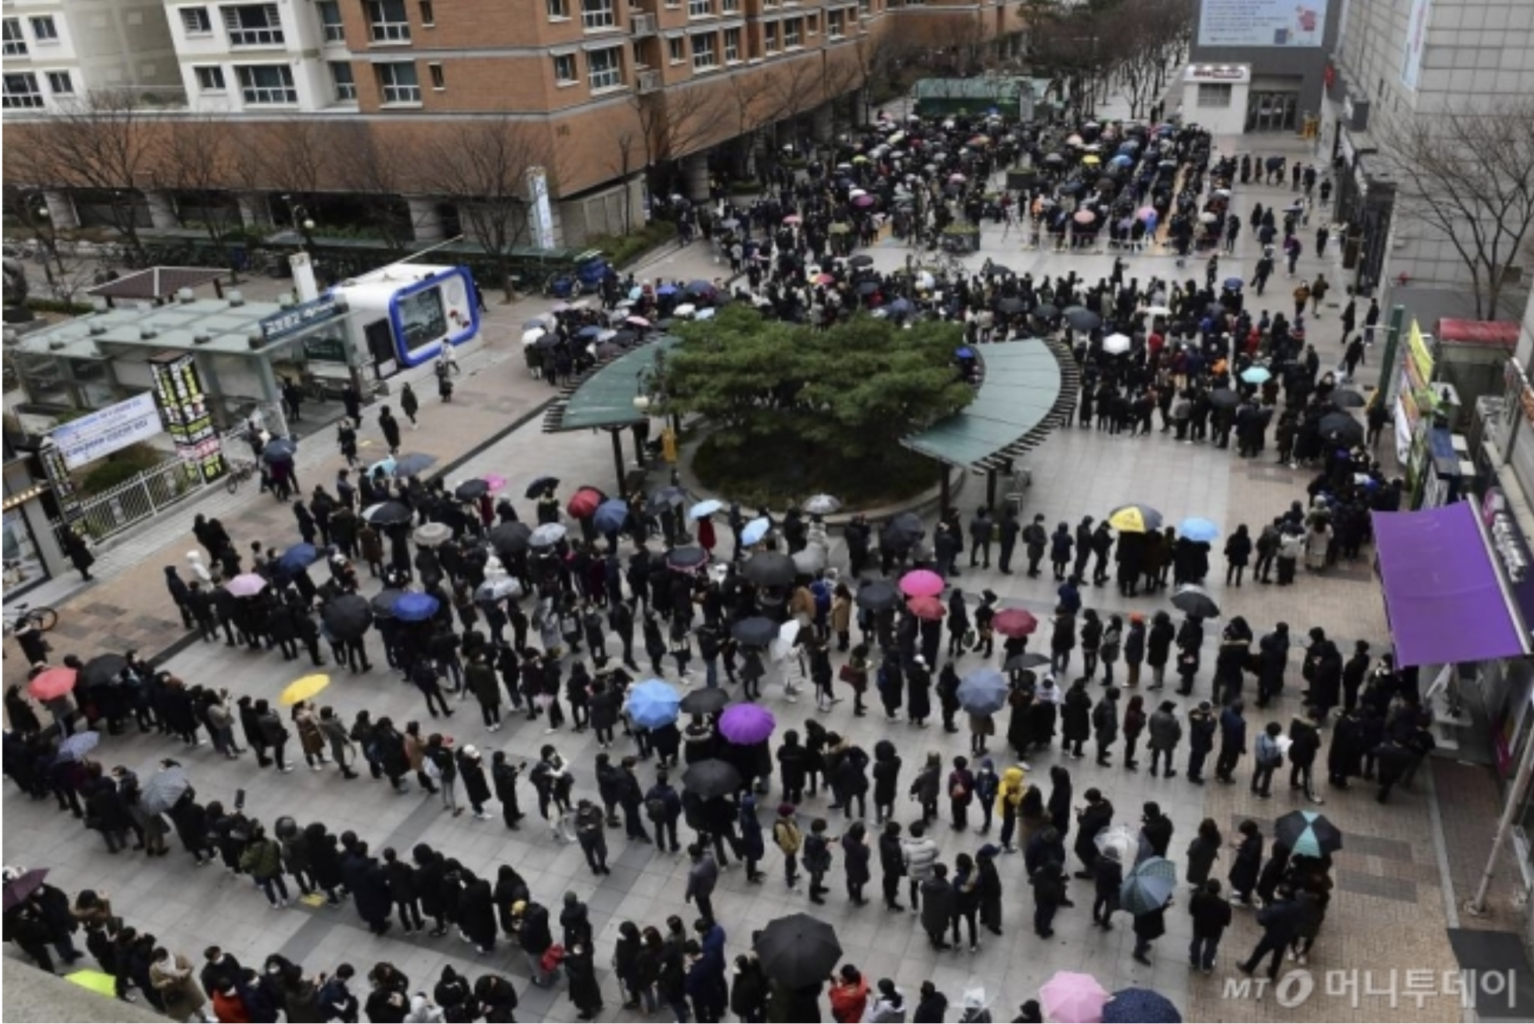 Areal view of very many people queuing in a public plaza. Several of them are covering themselves with umbrellas.